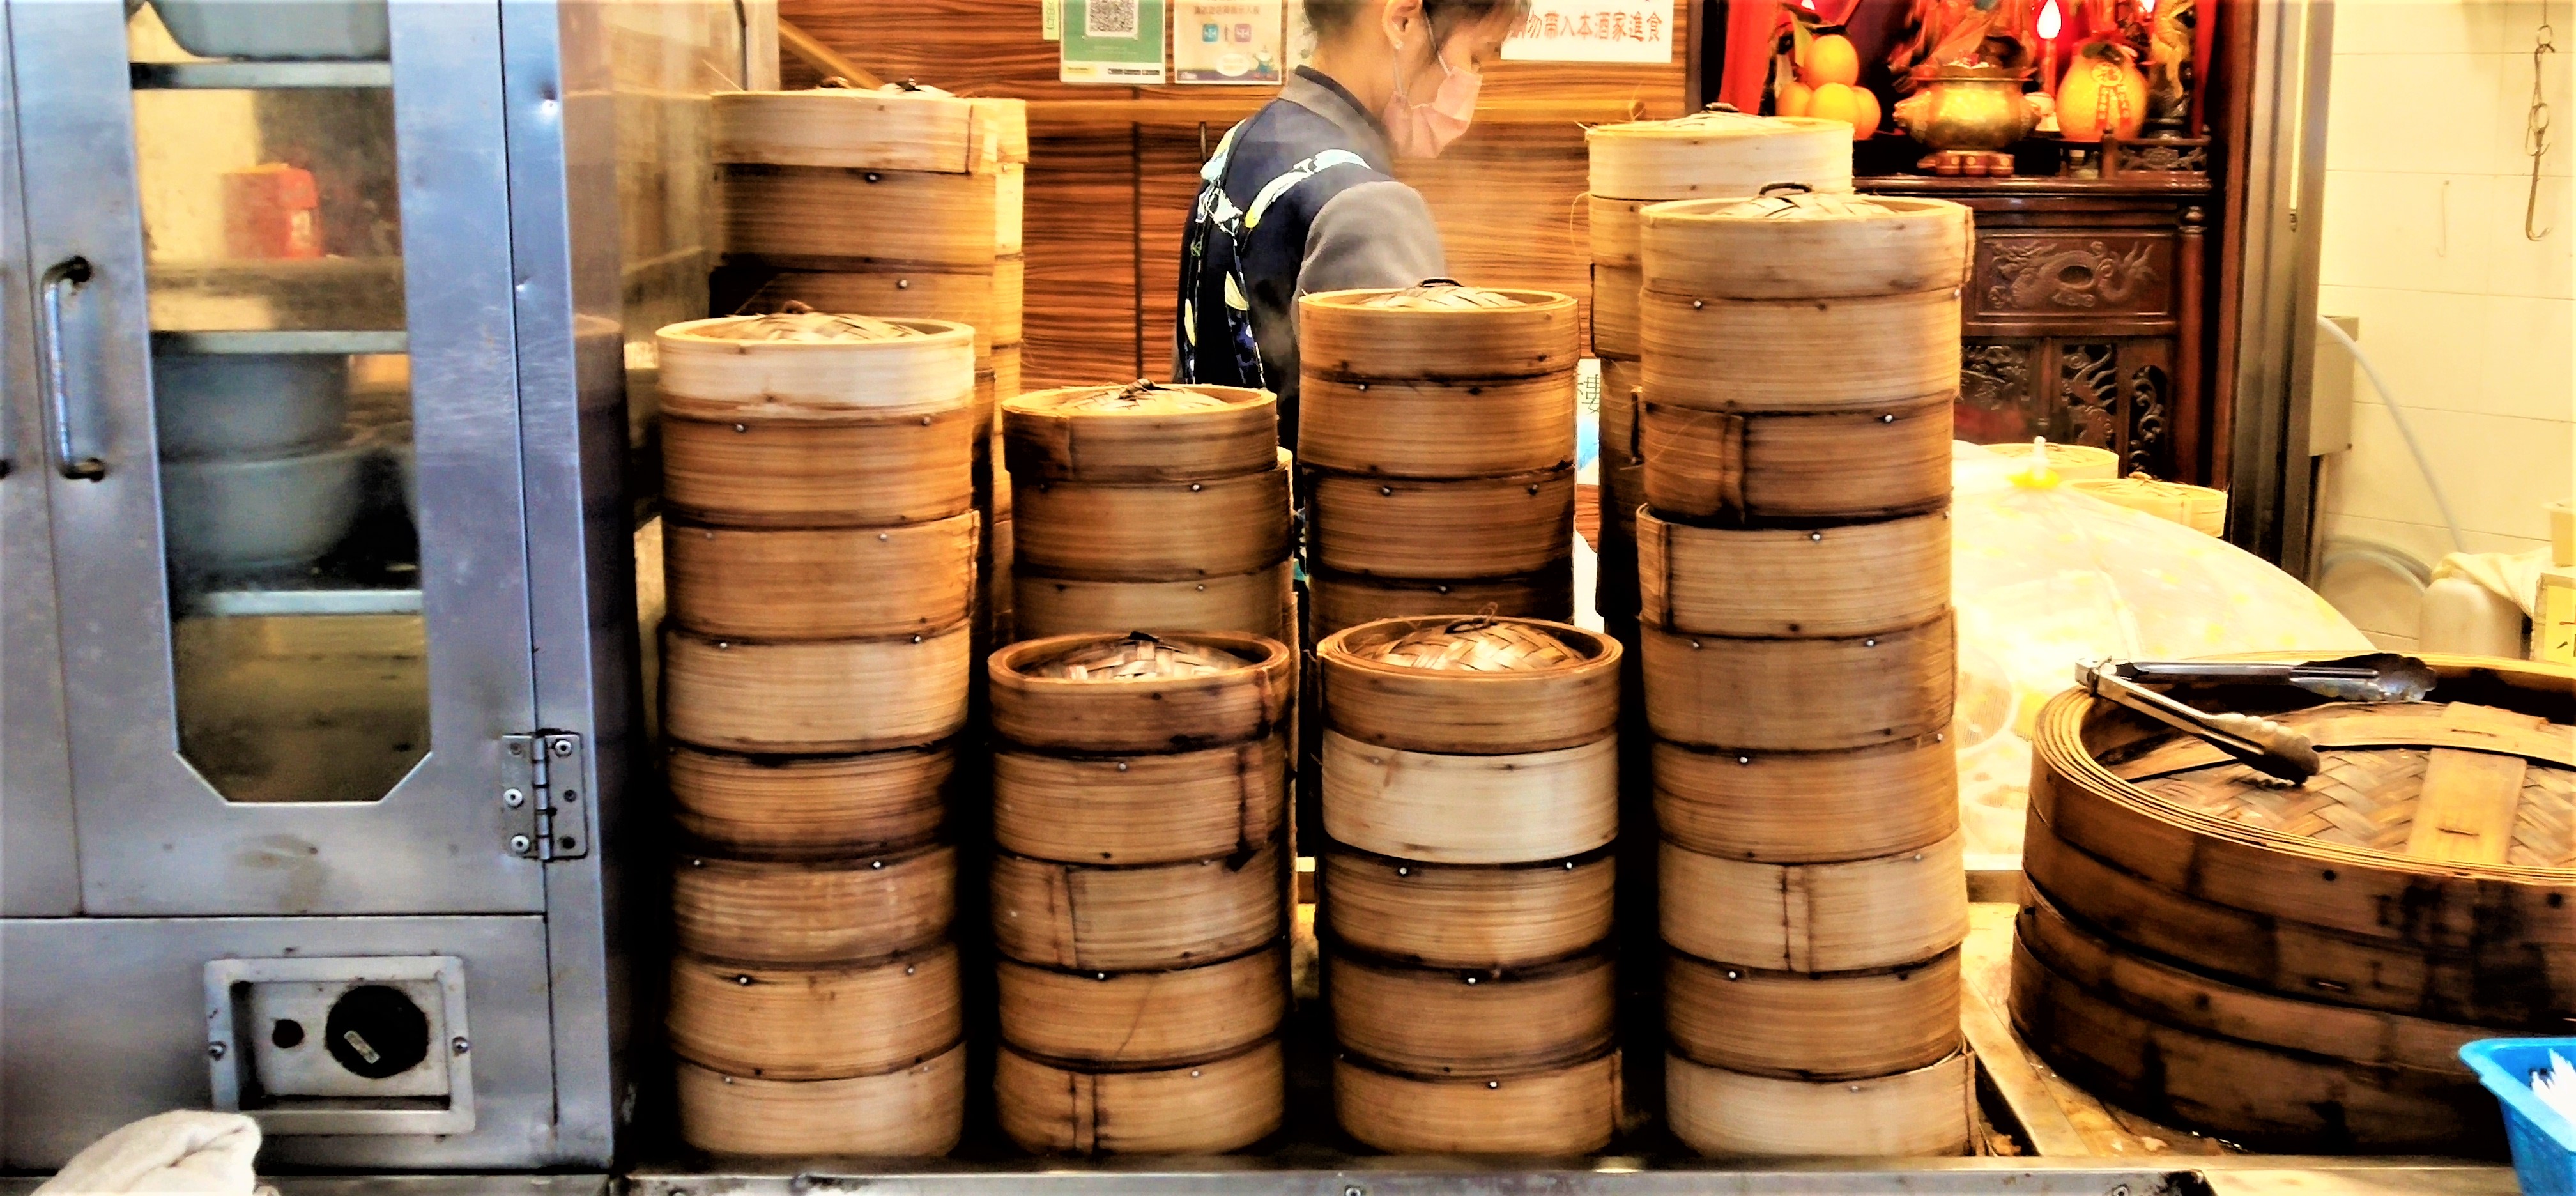 Counter for dim sum takeaway service at Hong Kong's local restaurant.